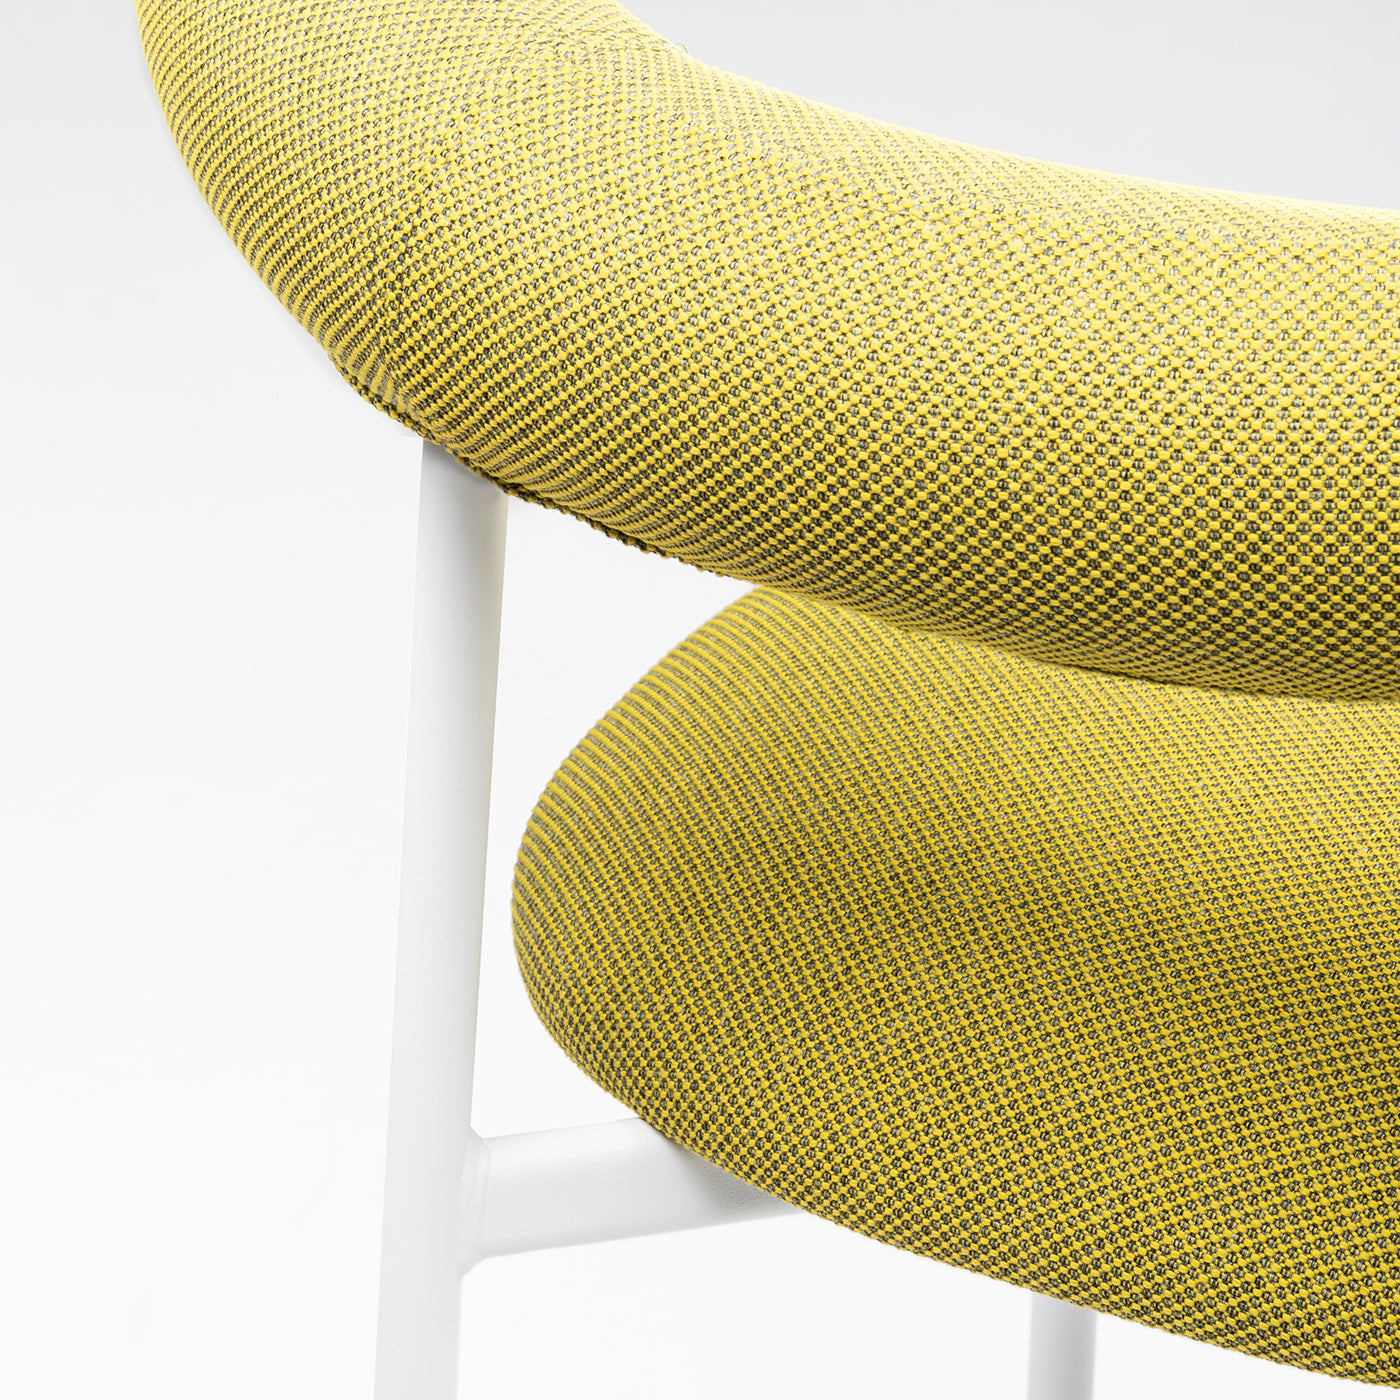 Pampa S Lime-Green & White Chair by Studio Pastina - Alternative view 3